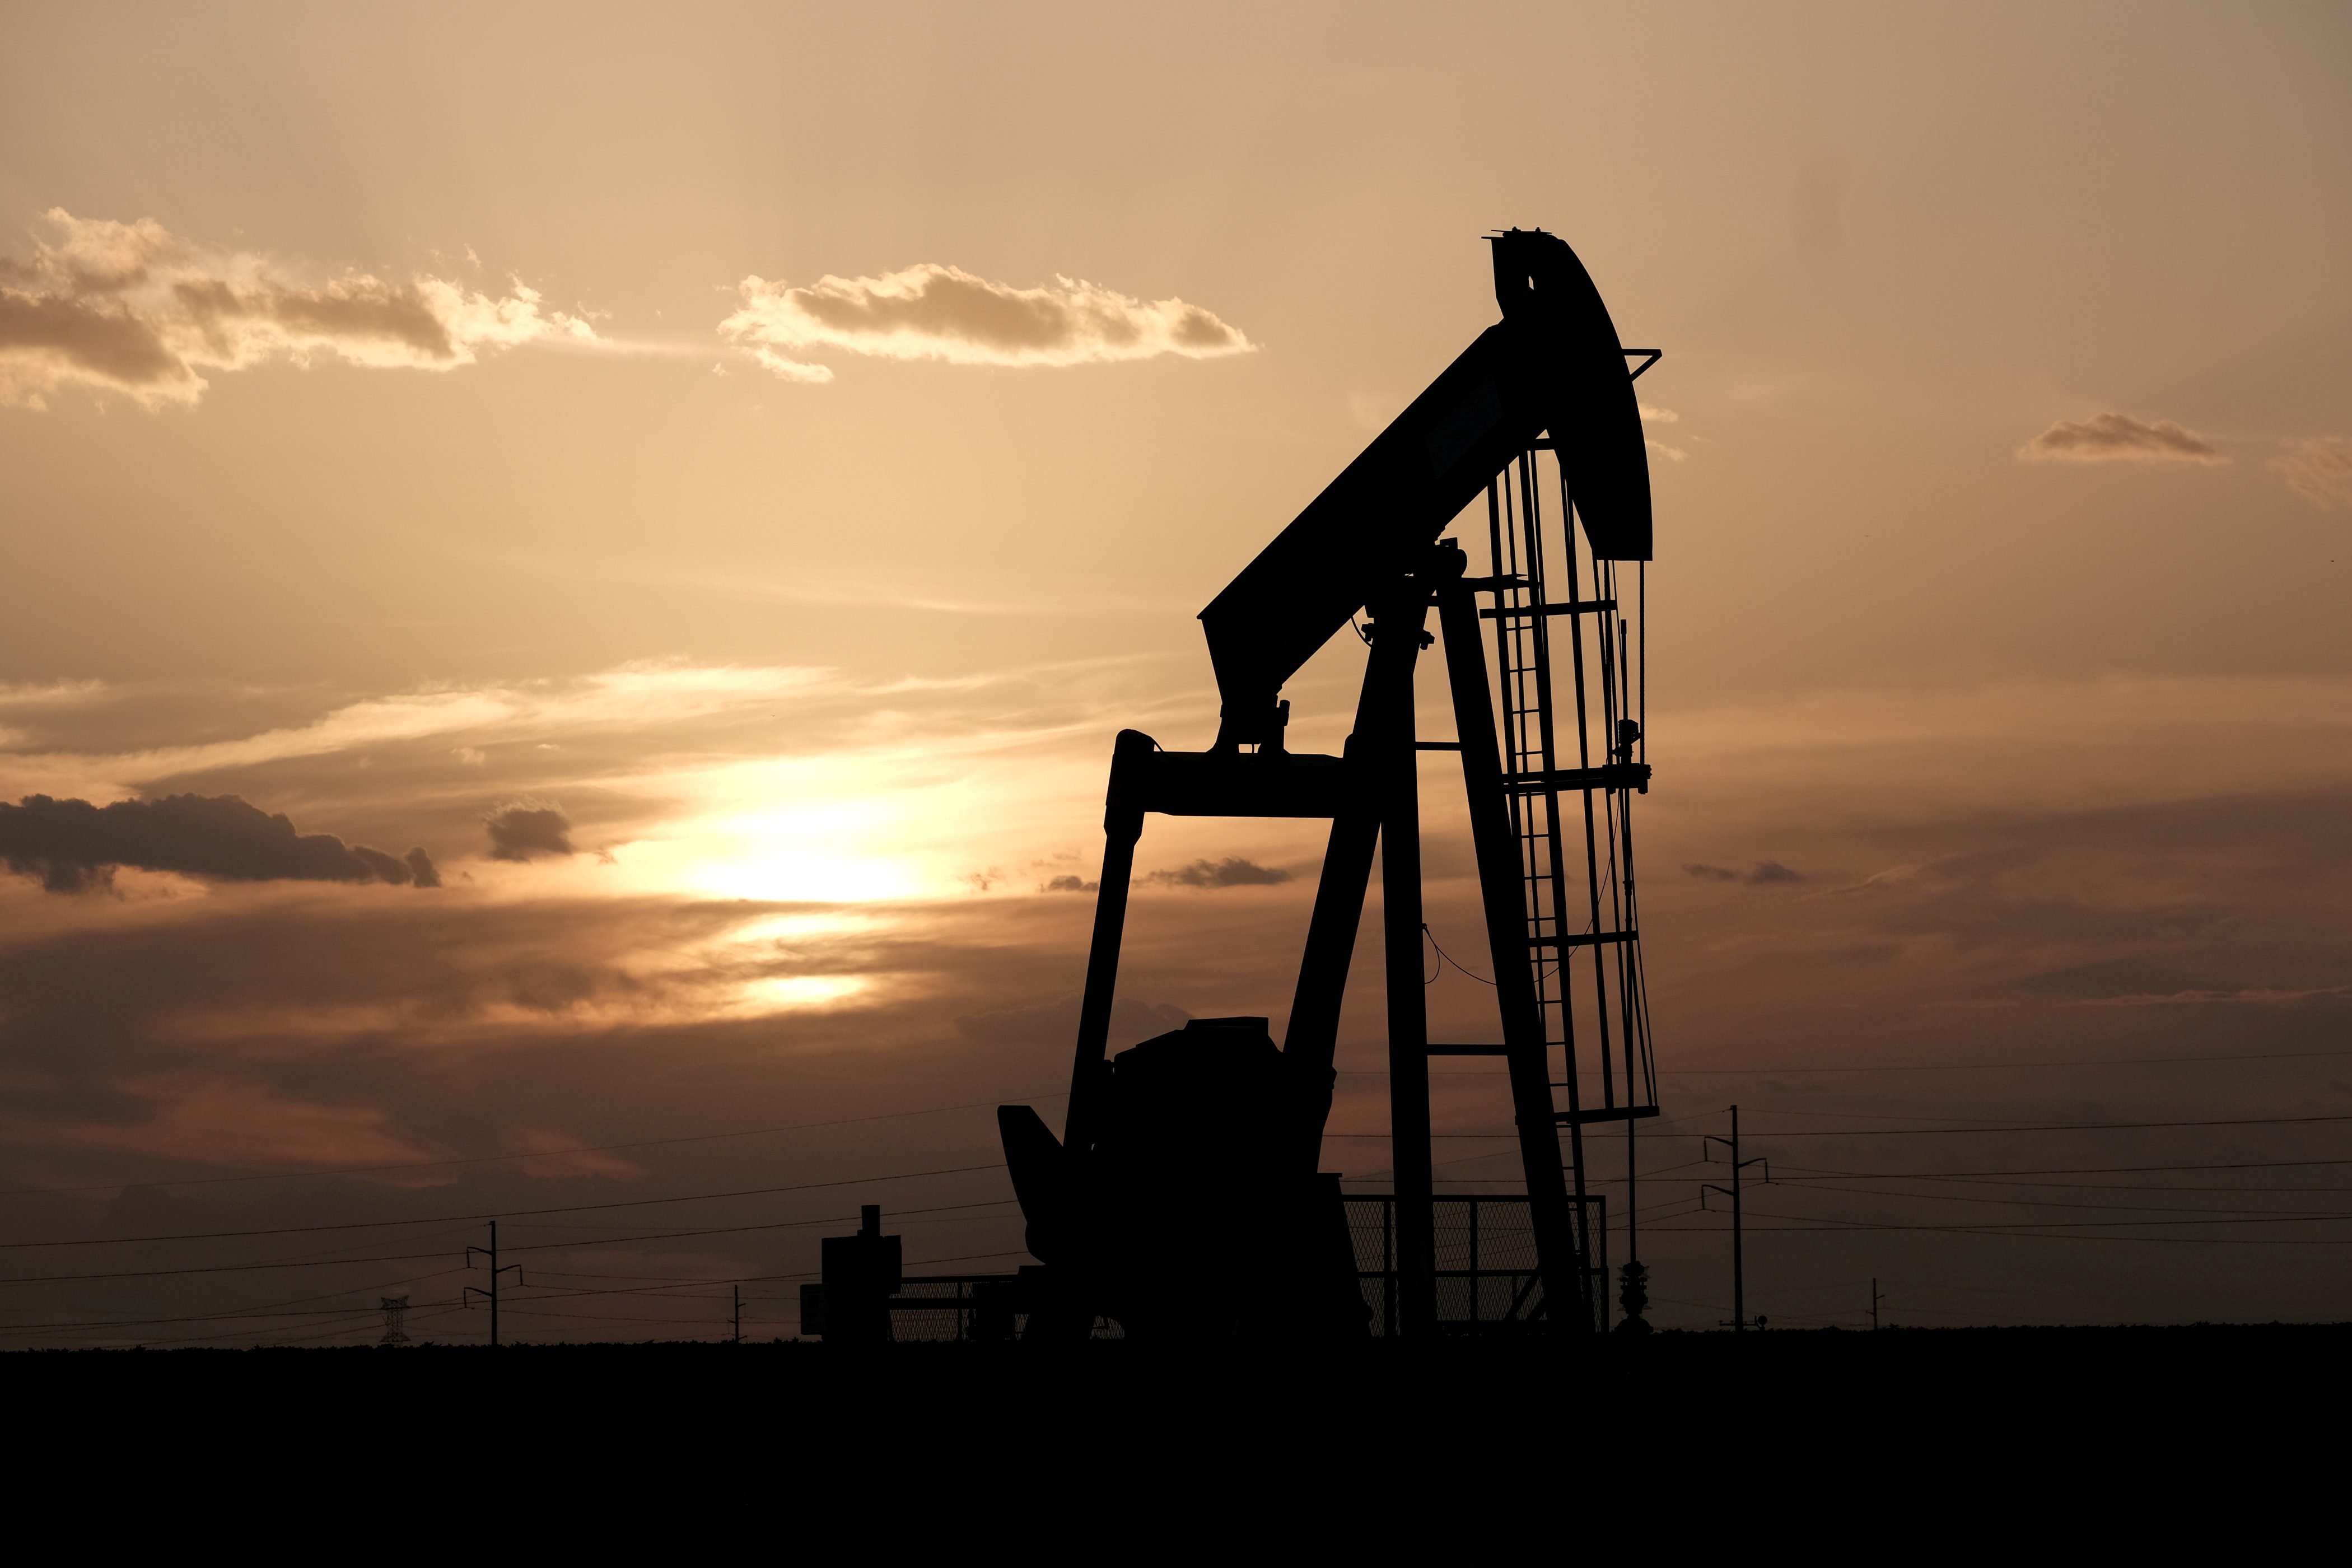 Brent crude prices at 11-month high, yields end flat